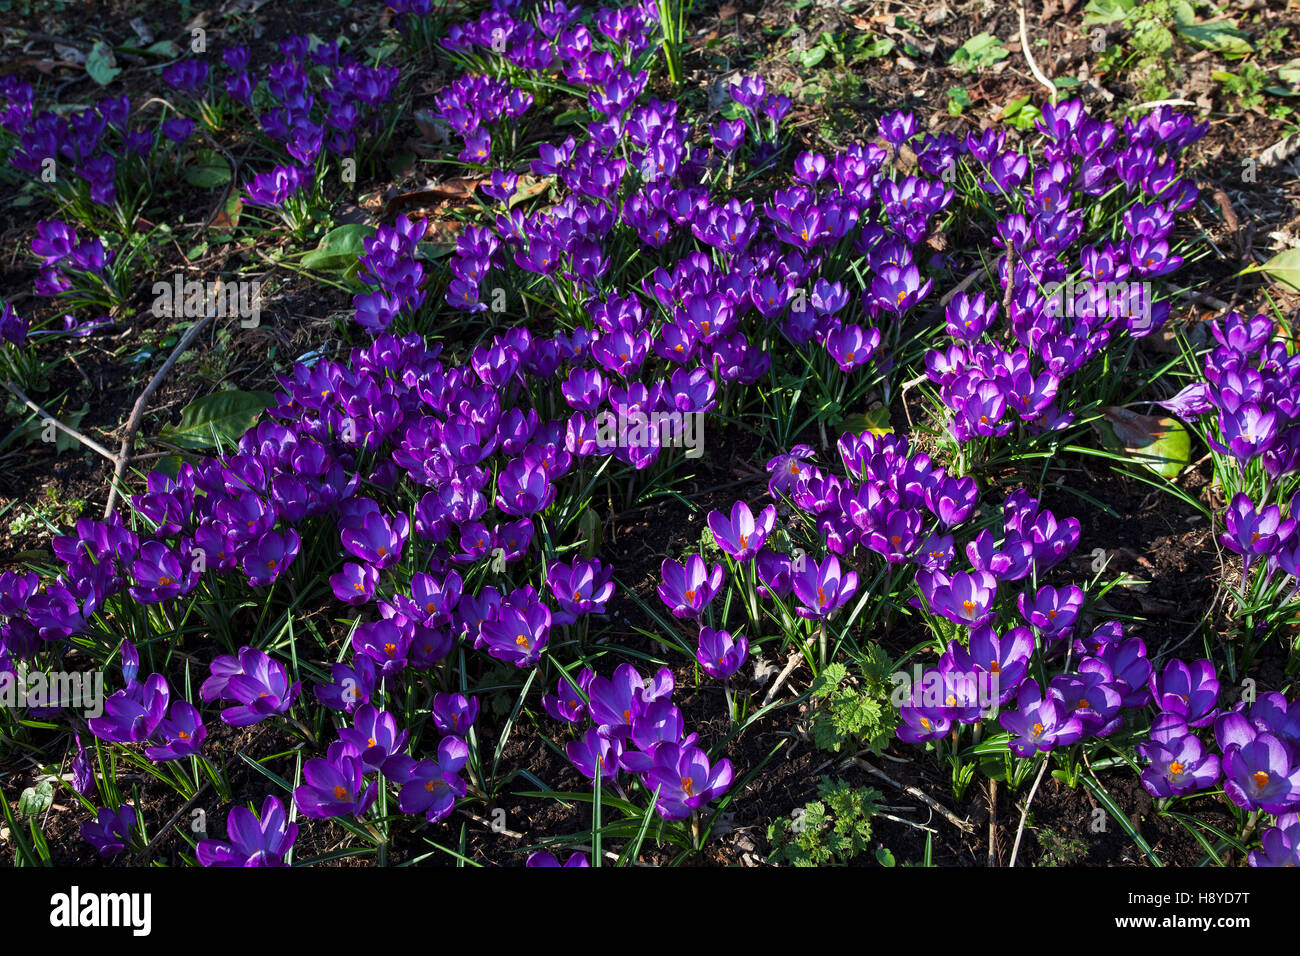 Crocus flowers in Jubilee Gardens Ringwood Hampshire England UK March 2016 Stock Photo